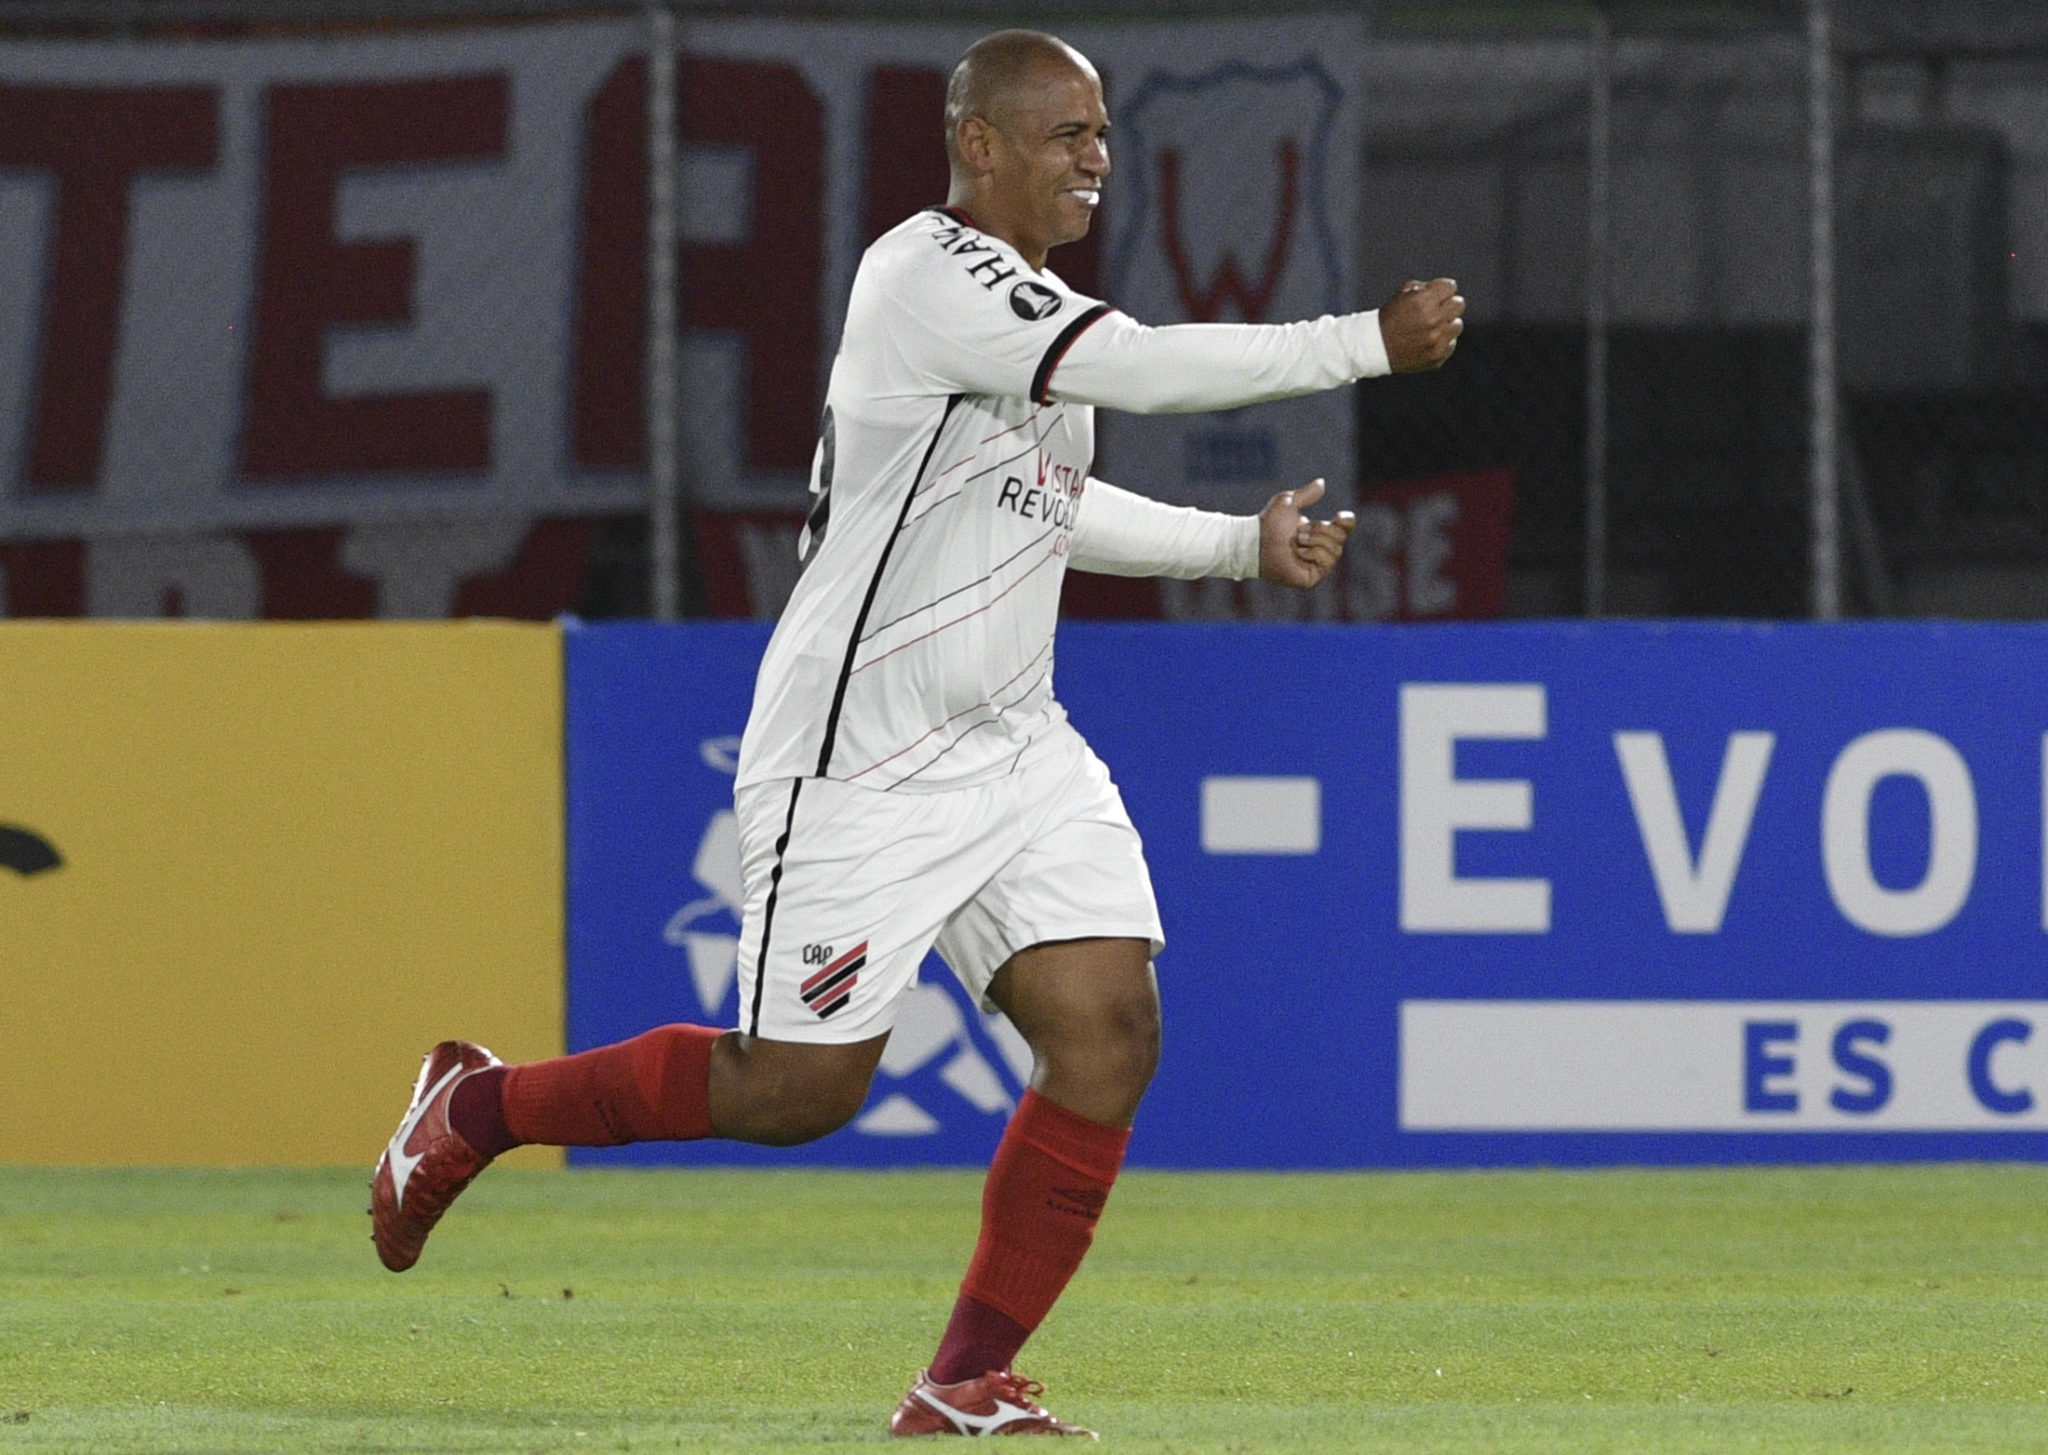 Brazil's Athletico Paranaense forward Walter celebrates after scoring against Bolivia's Jorge Wilstermann, during their closed-door Copa Libertadores group phase football match at the Felix Capriles stadium in Cochabamba, Bolivia, on September 15, 2020, amid the COVID-19 novel coronavirus pandemic. (Photo by AIZAR RALDES / AFP) (Photo by AIZAR RALDES/AFP via Getty Images)